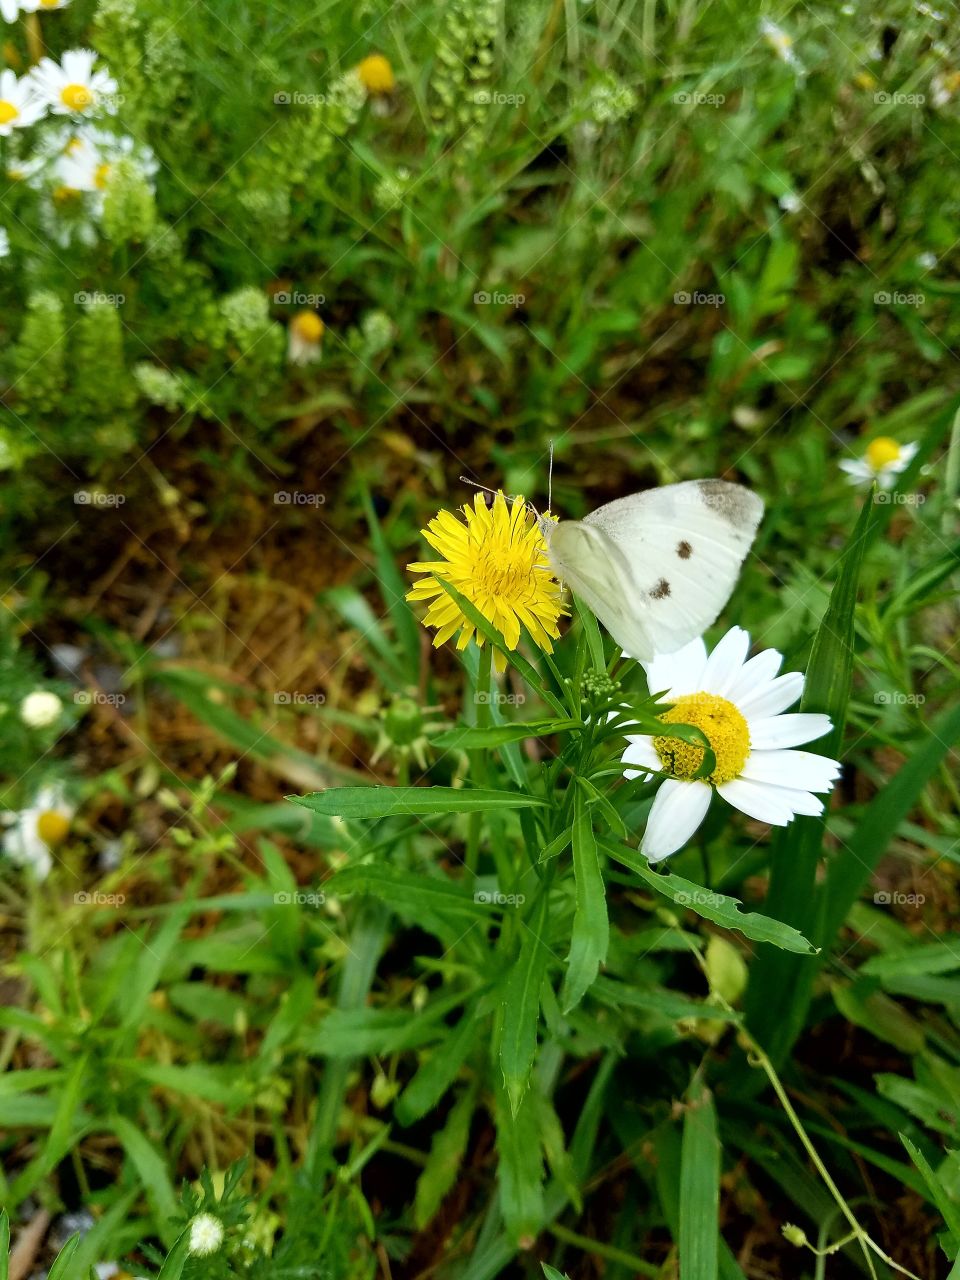 pollination of daisy and dandelion by a butterfly